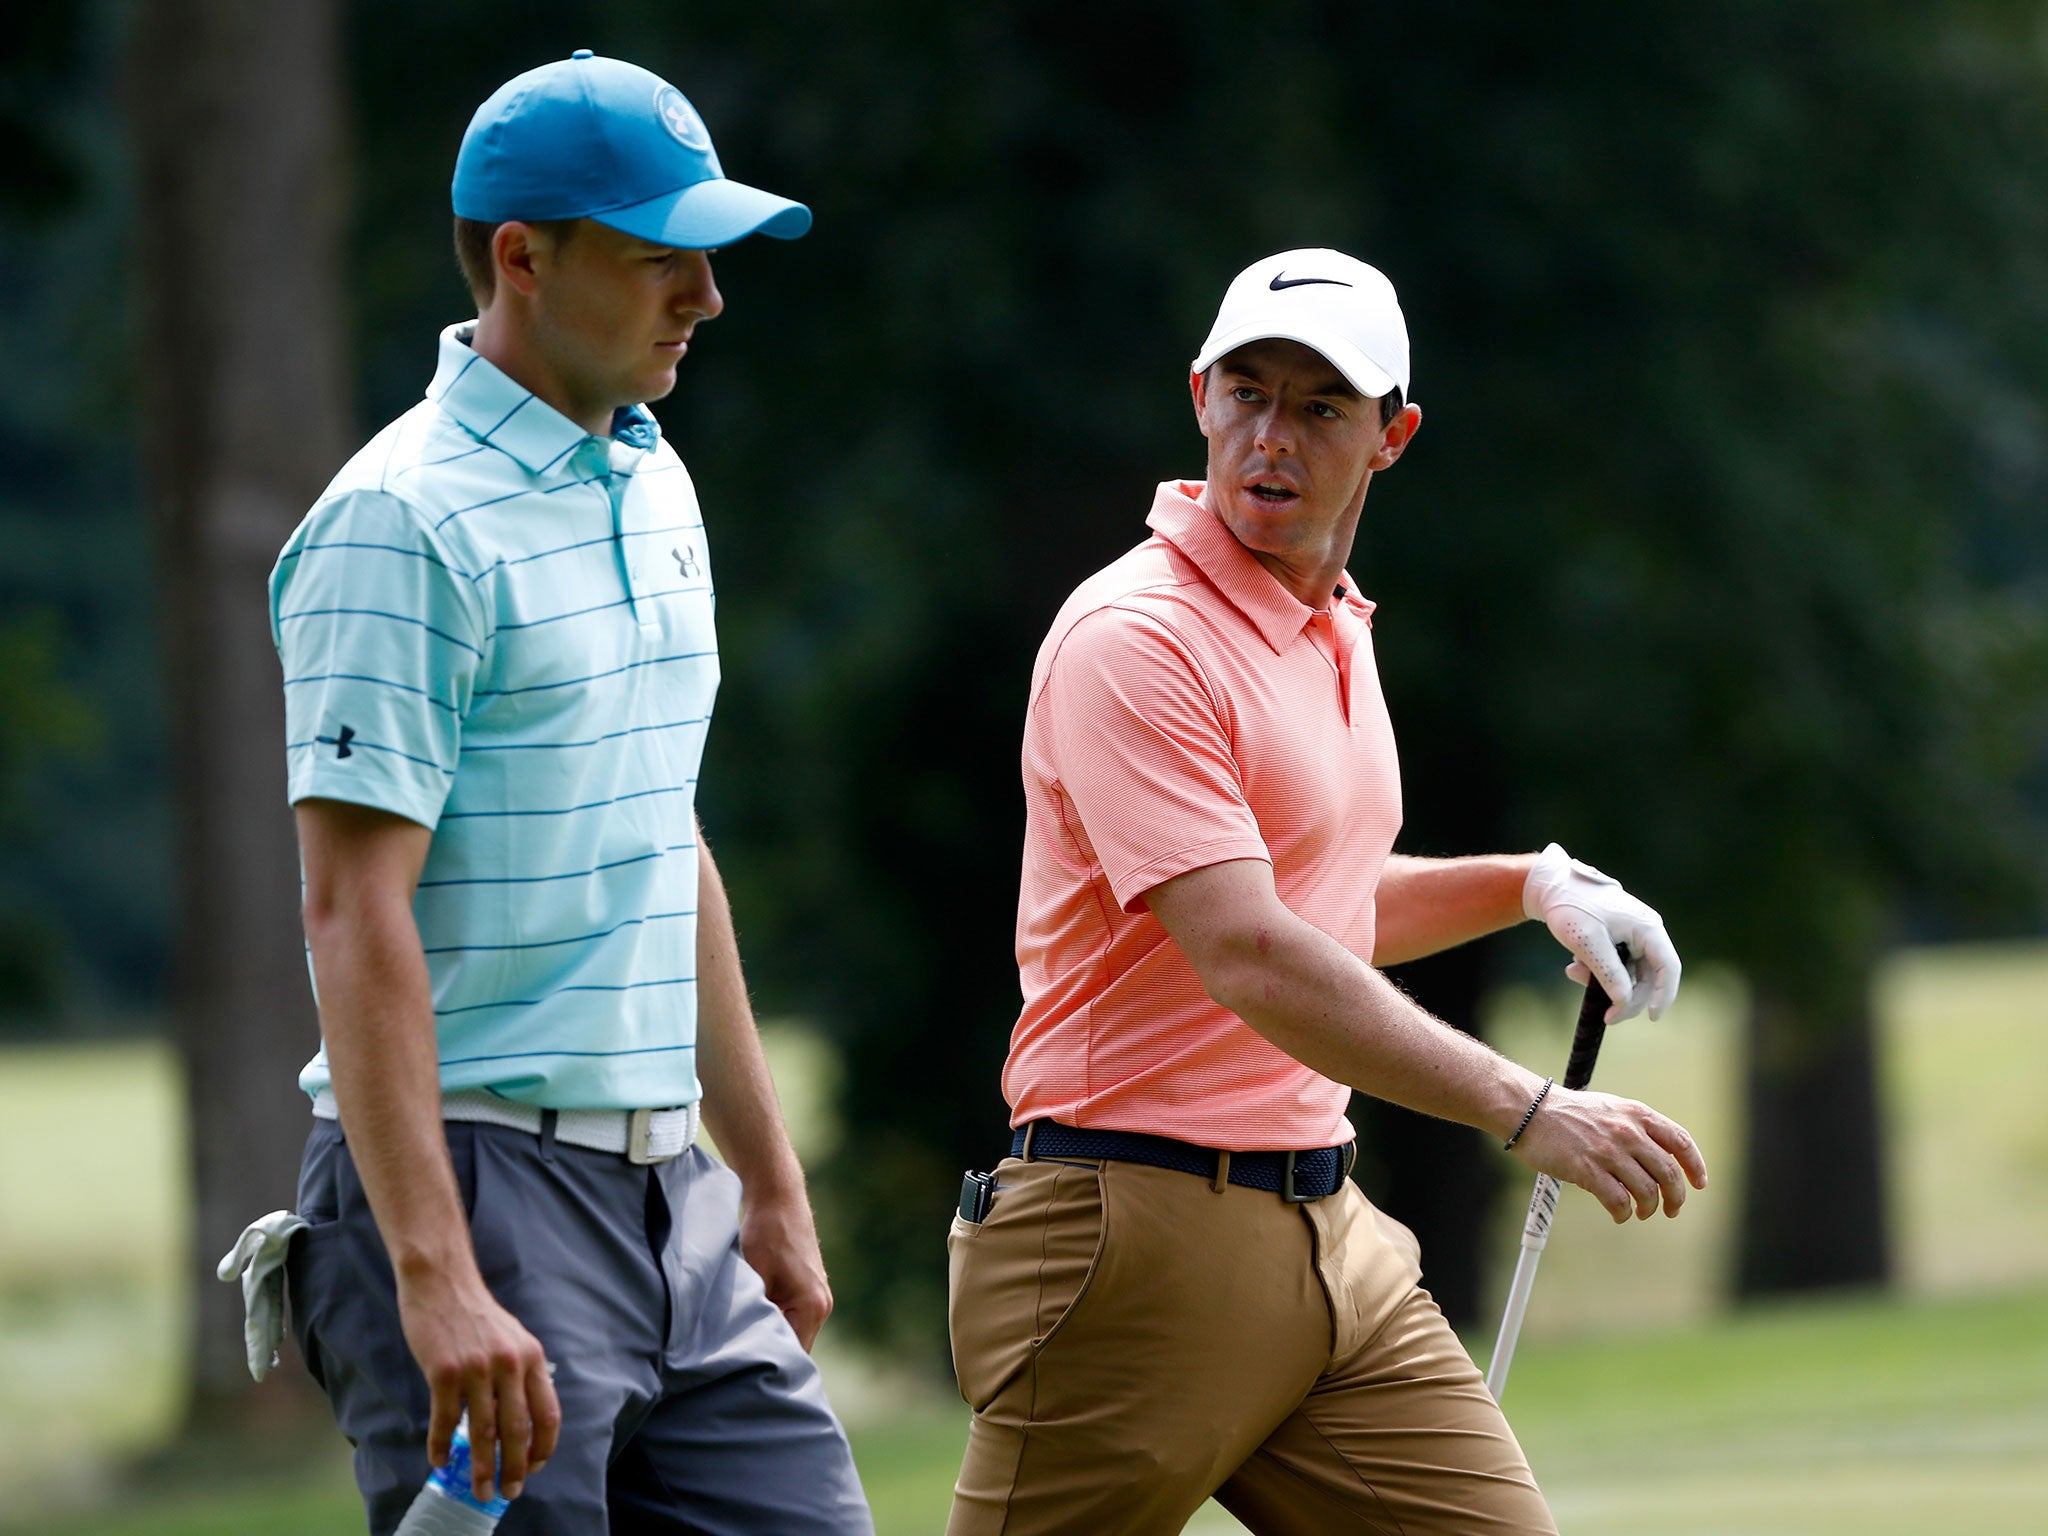 Rory McIlroy is the favourite to win the PGA Championship ahead of Jordan Spieth